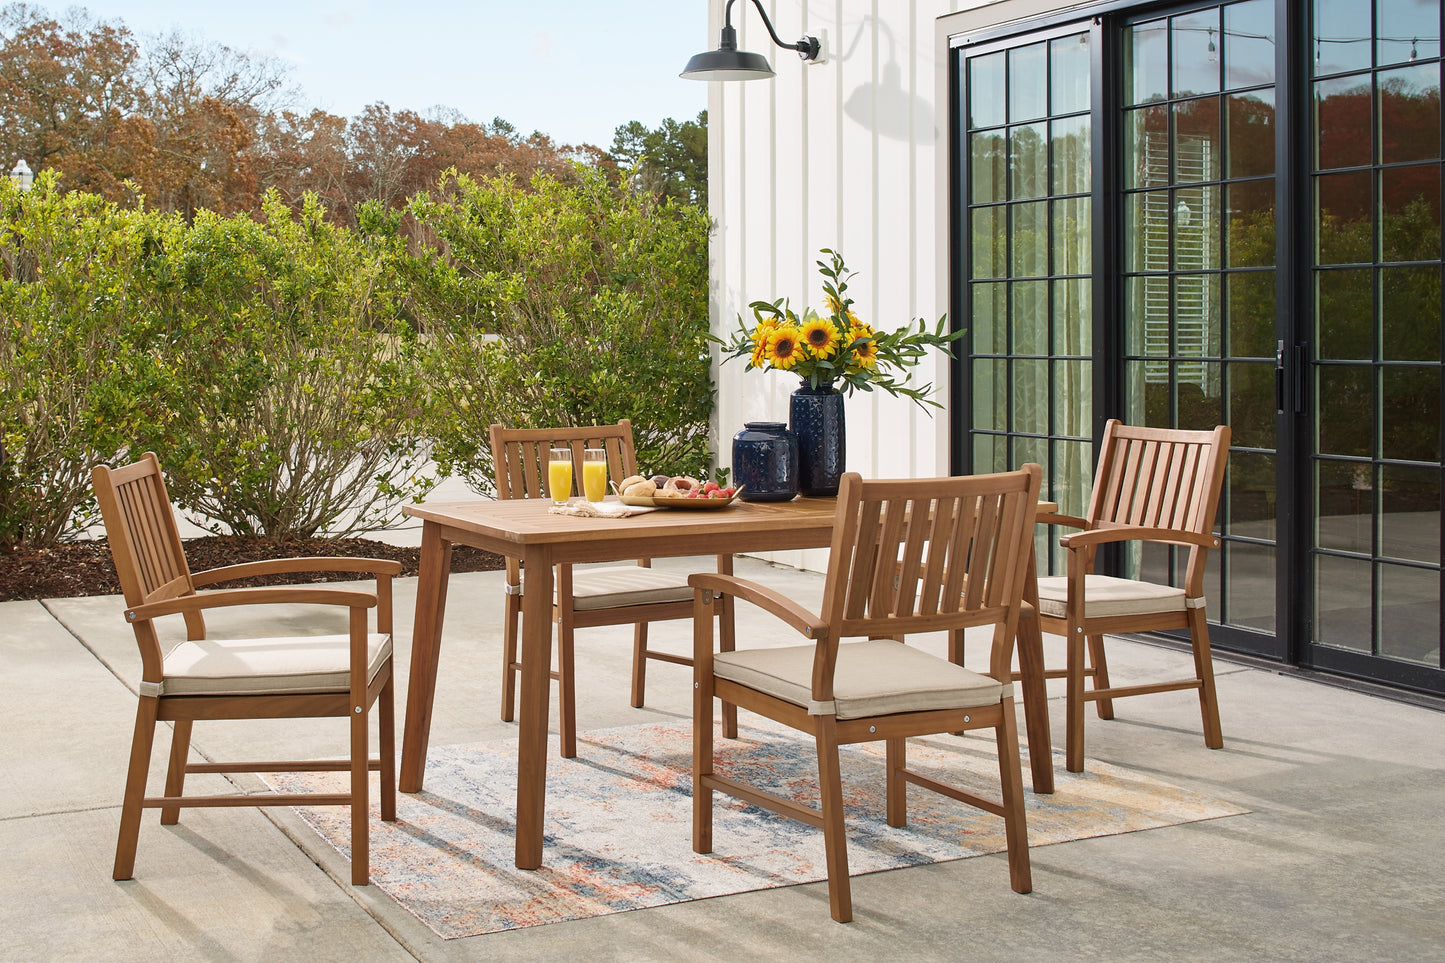 Janiyah Outdoor Dining Table and 4 Chairs Wilson Furniture (OH)  in Bridgeport, Ohio. Serving Bridgeport, Yorkville, Bellaire, & Avondale